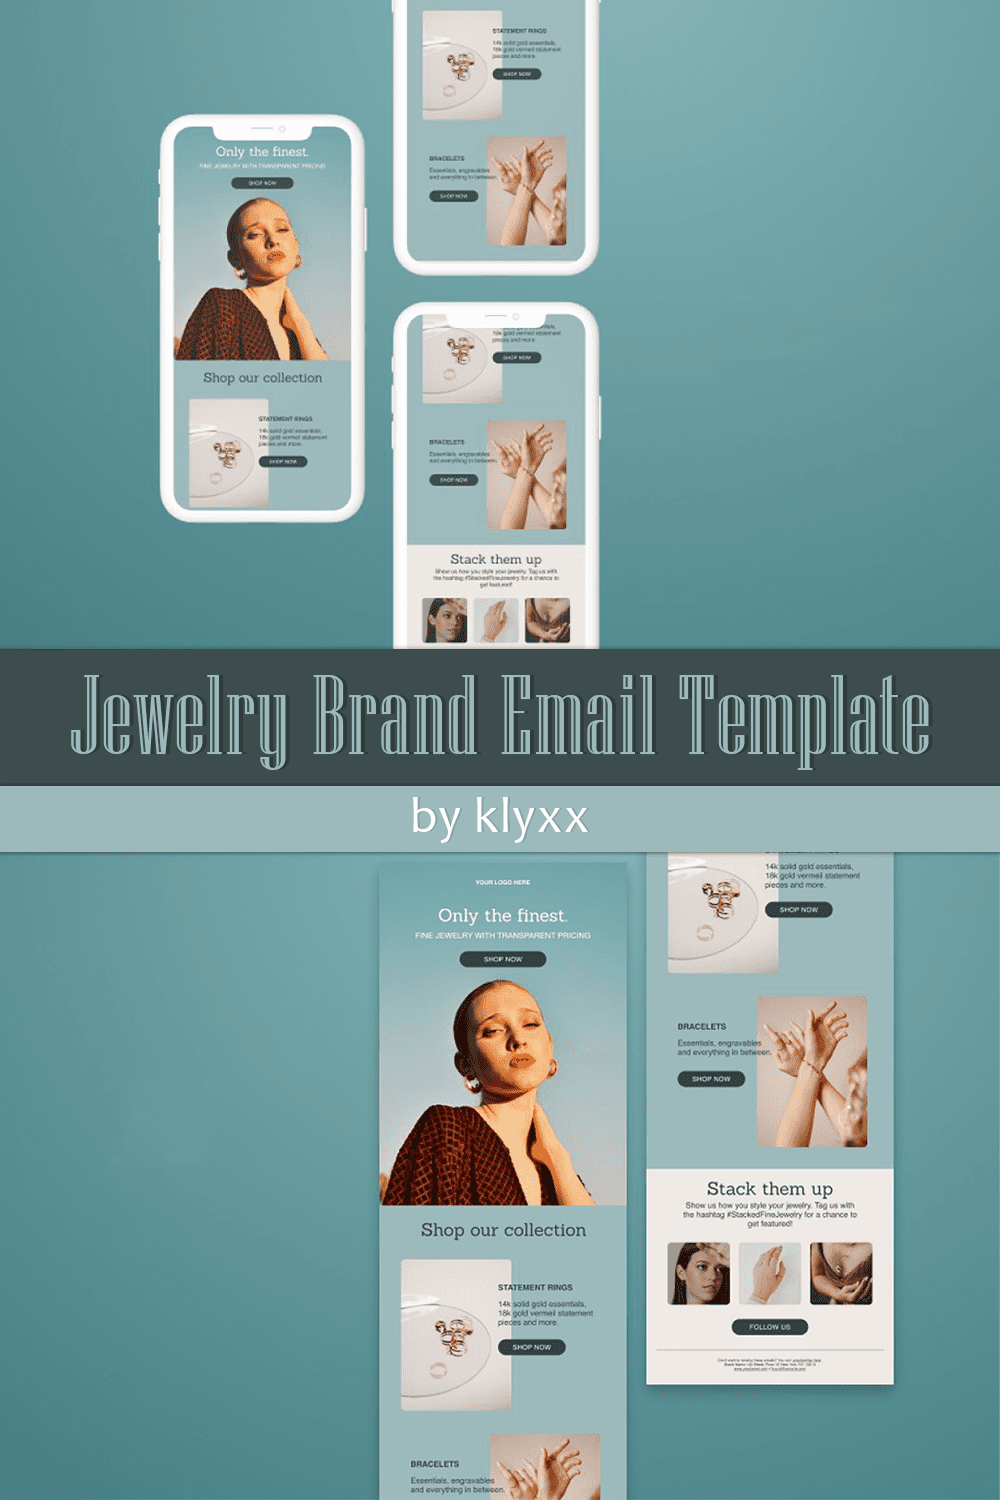 An image pack of an irresistible jewelry brand email design template.